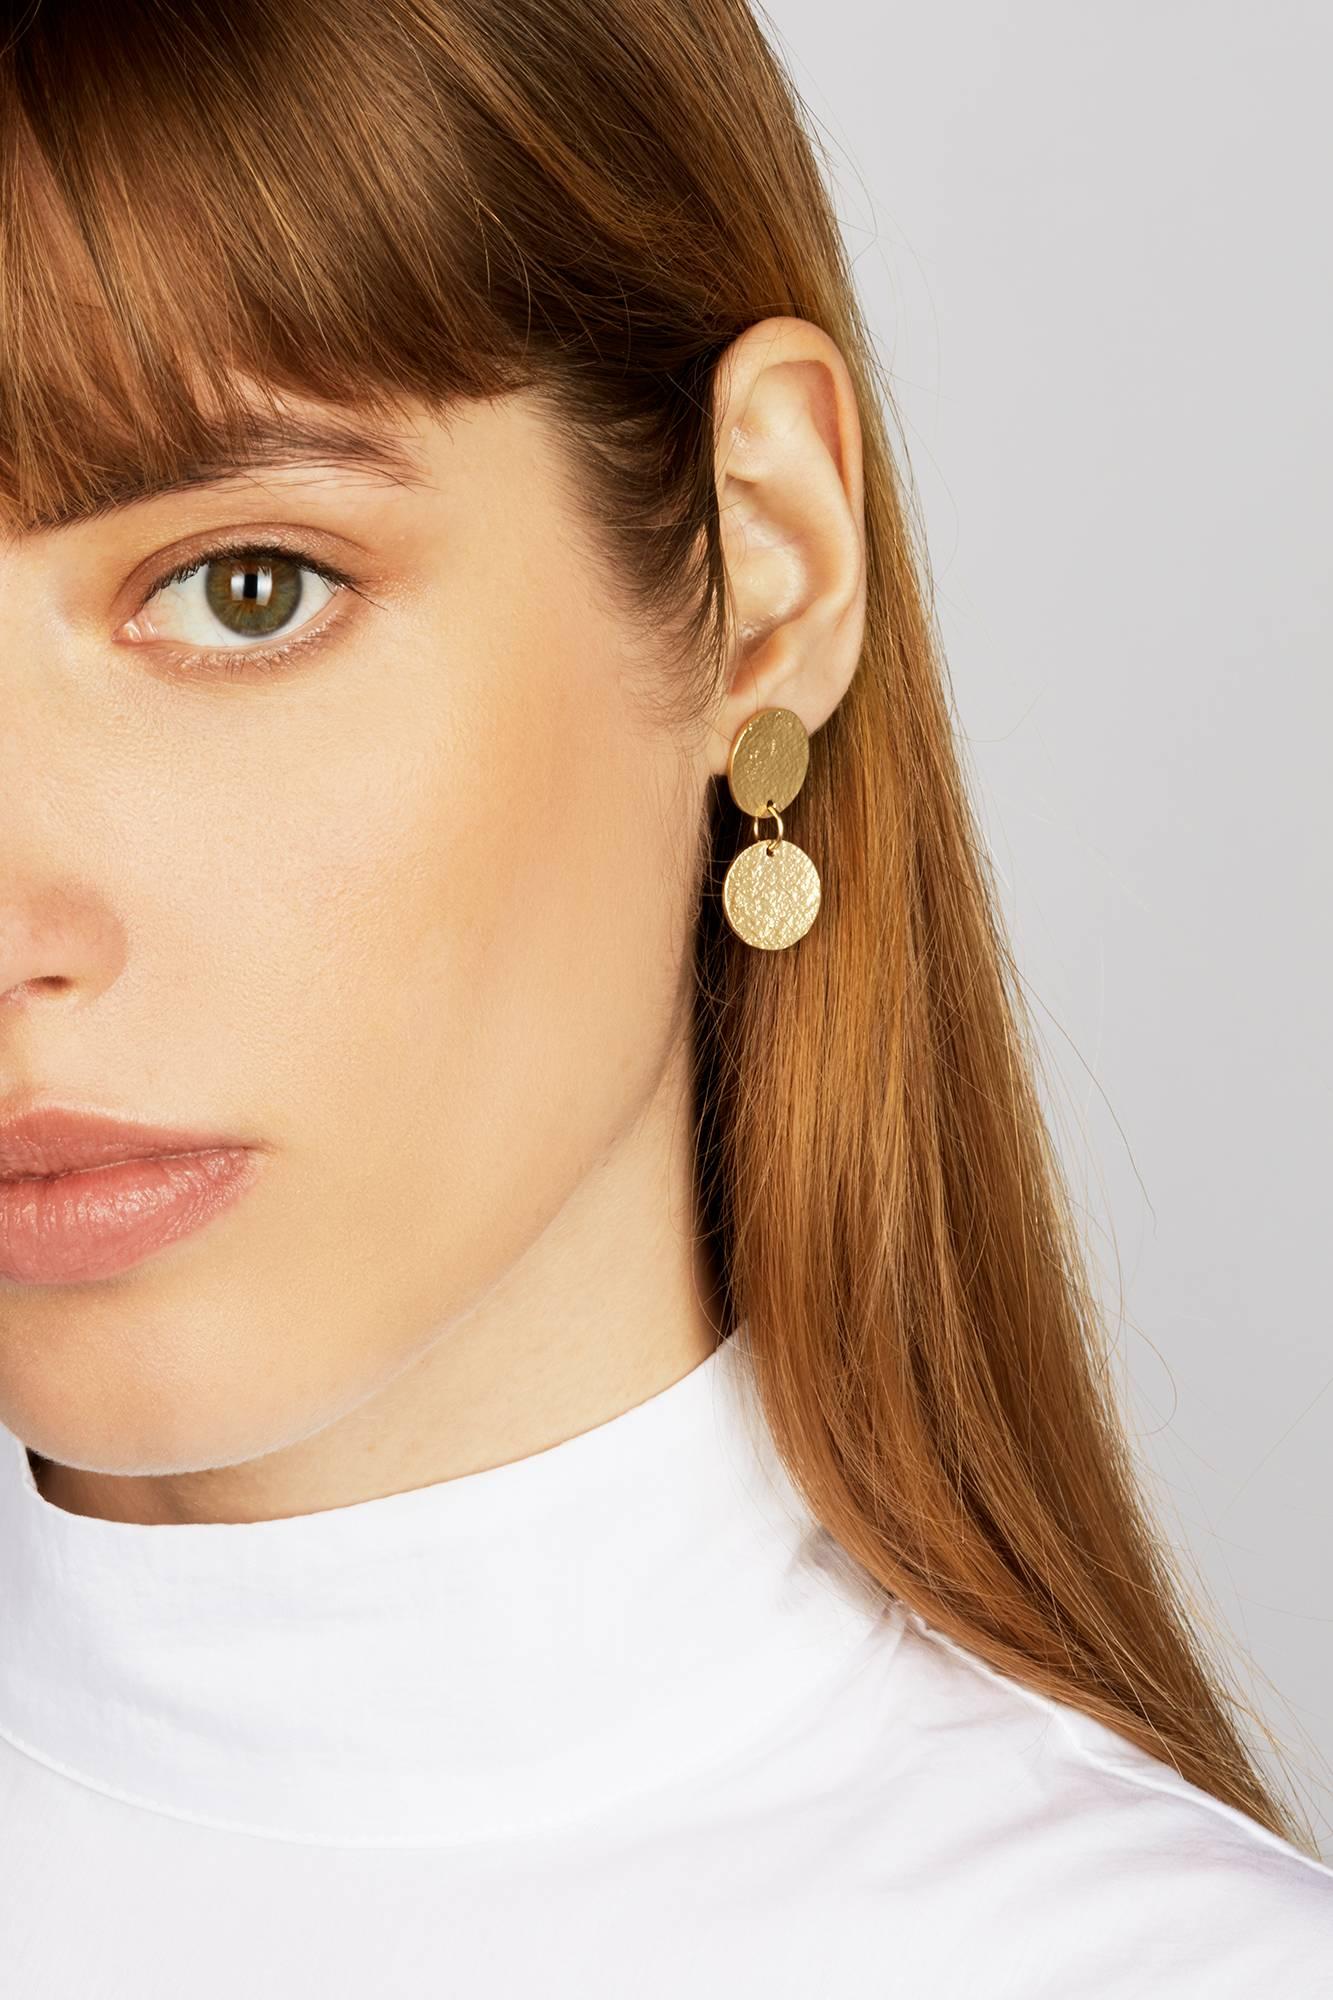 Articulated statement earrings with a shimmering texture. In 18-carat gold-plated sterling silver with a post and butterfly closure. Earrings measure approximately 1.4 cm wide by 4 cm long. 

Handmade in London. Hallmarked 925 Allison Bryan London.